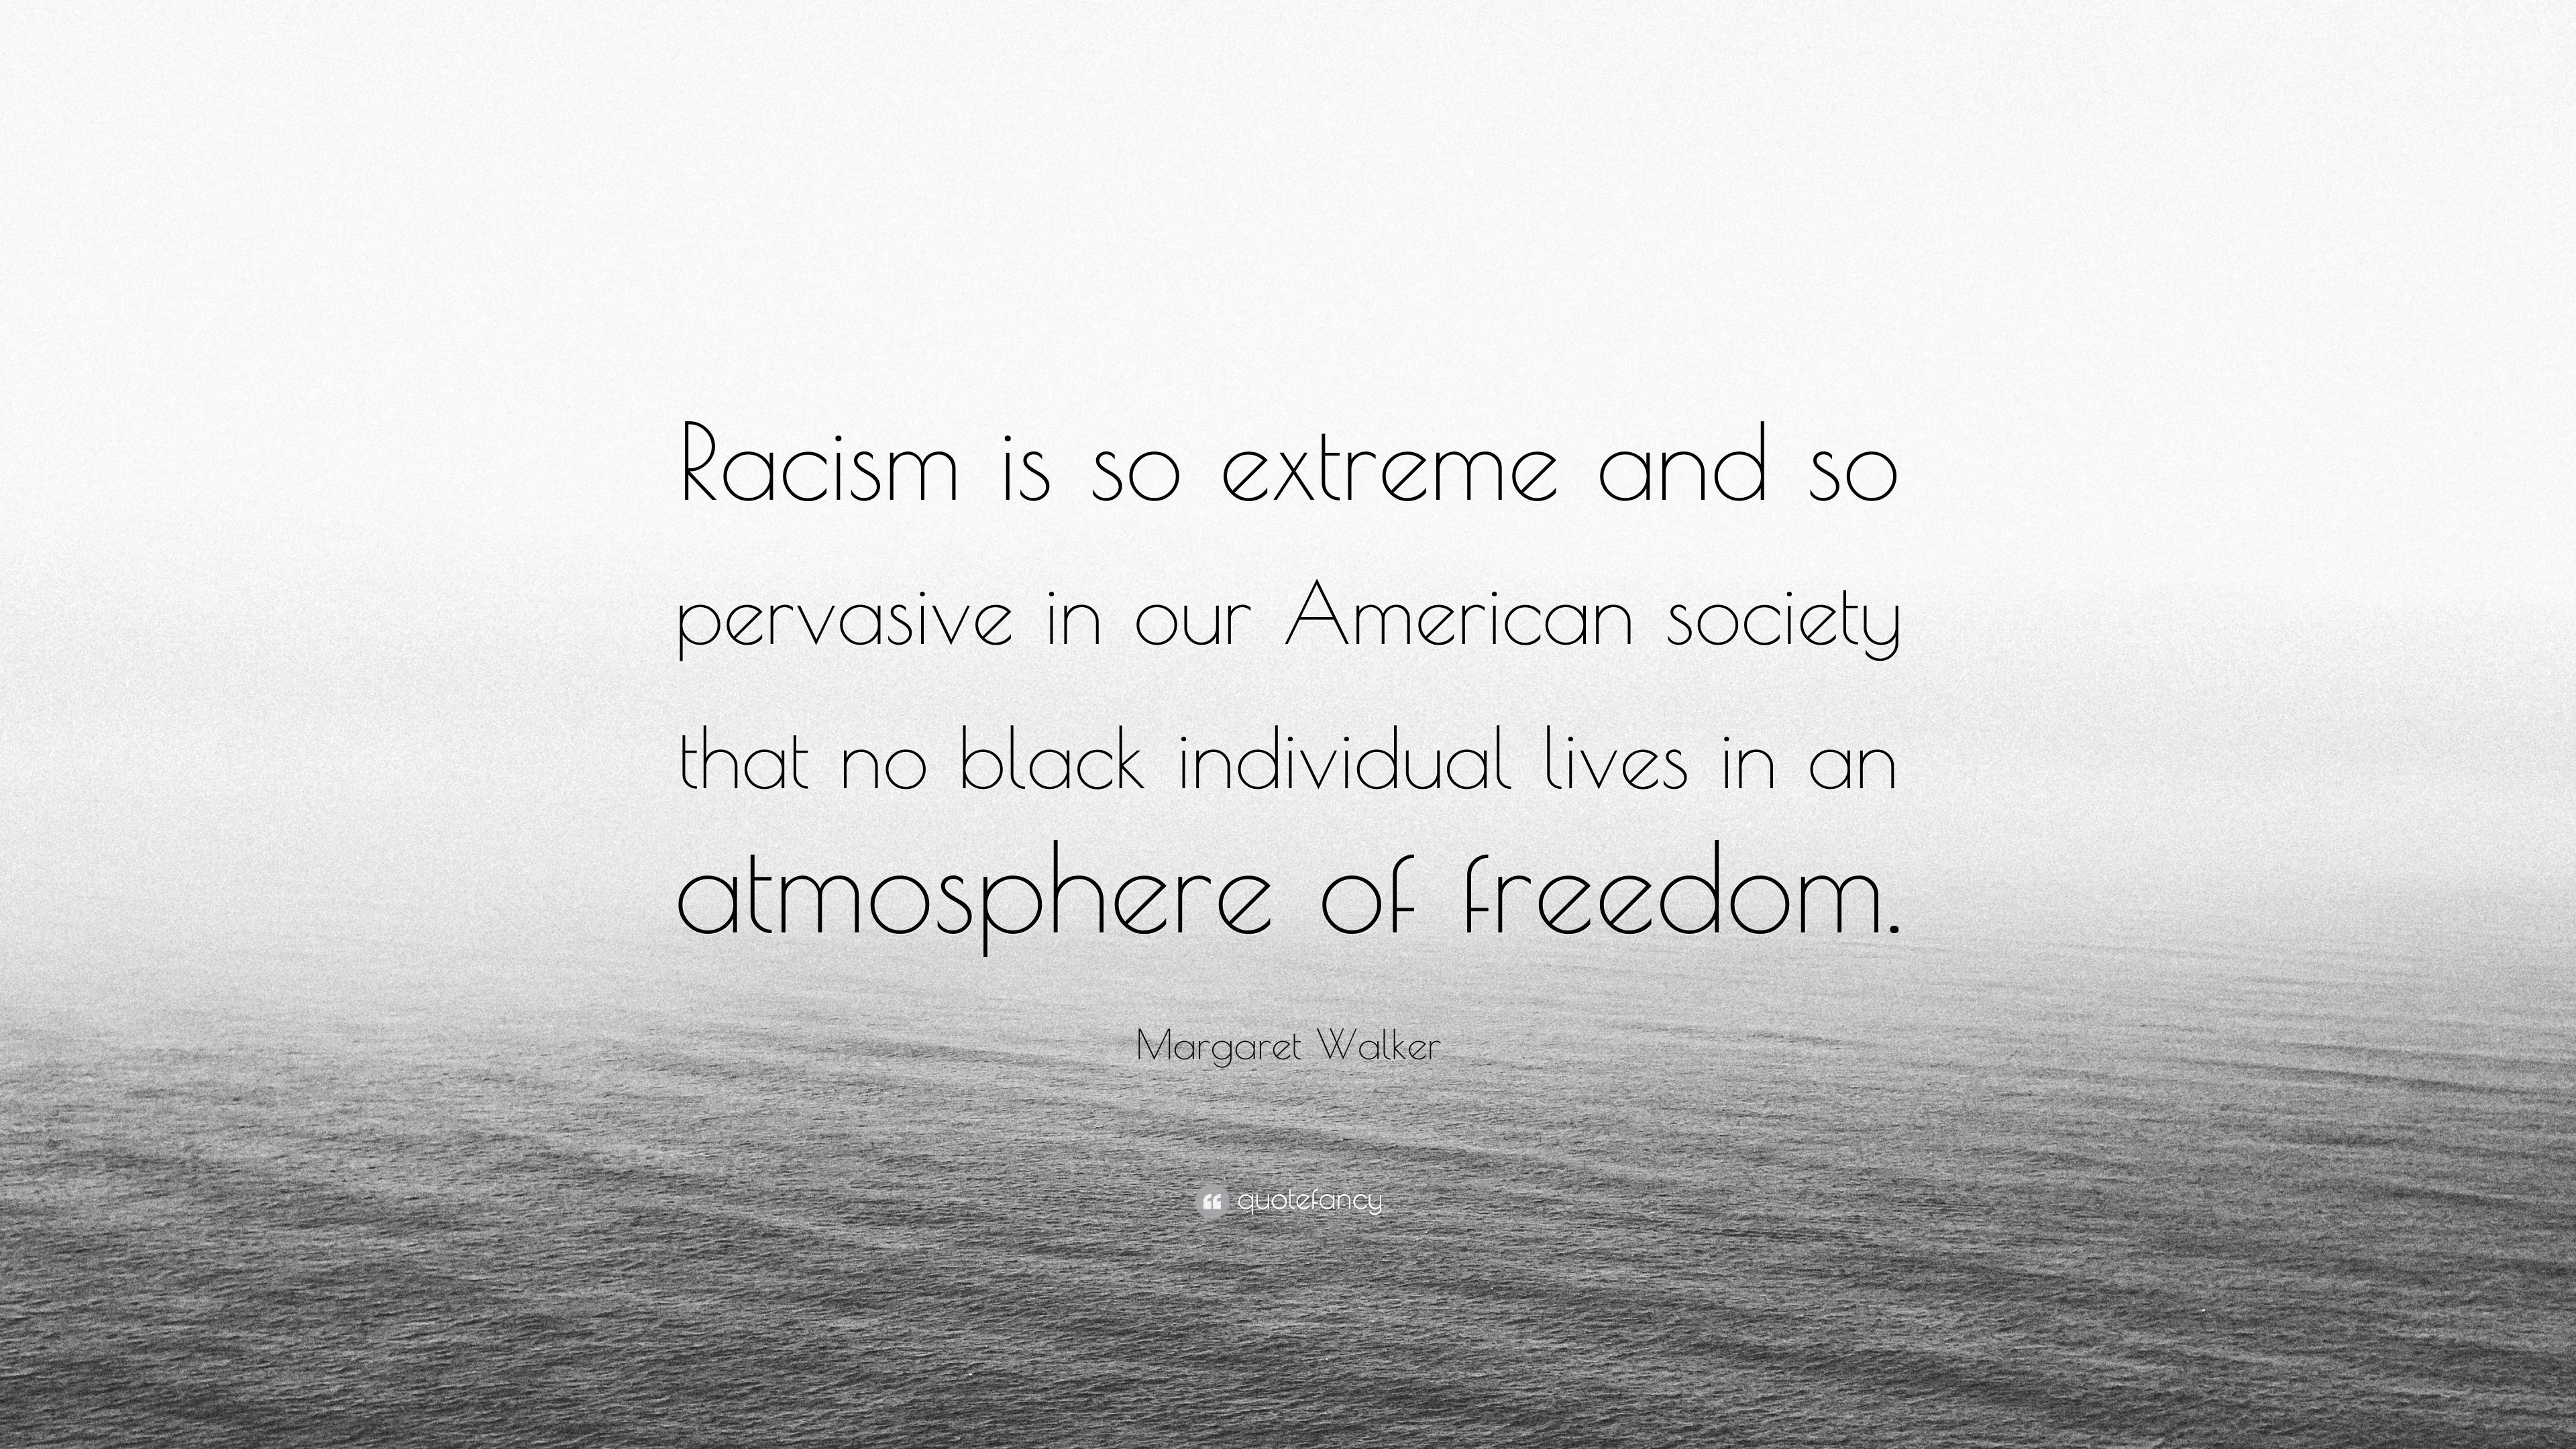 Margaret Walker Quote: “Racism is so extreme and so pervasive